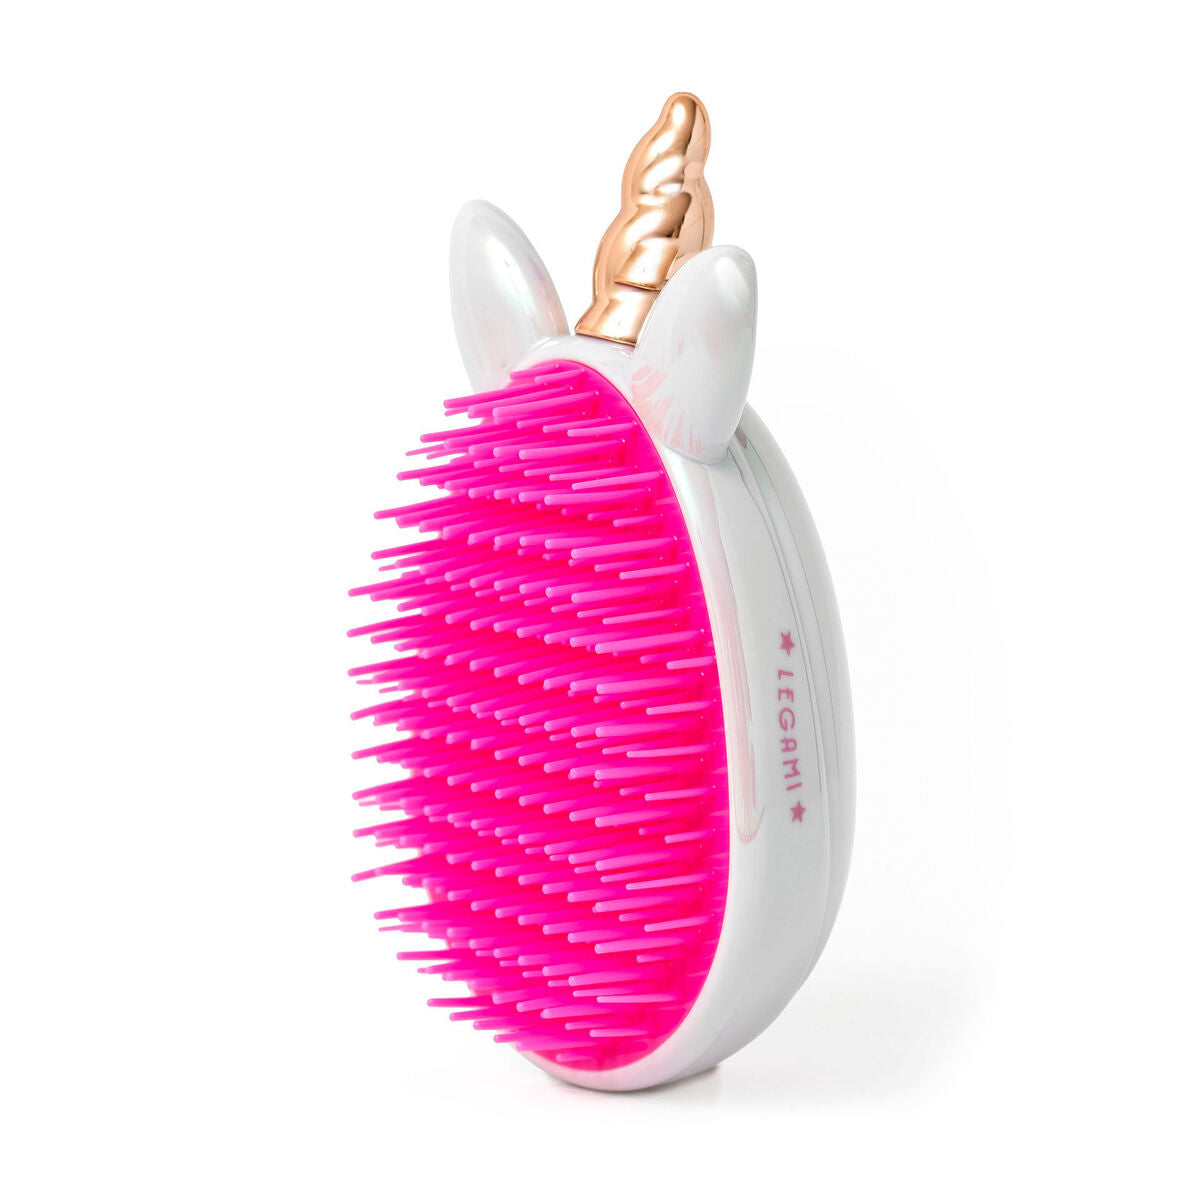 Amazing Hair Brush Unicorn | Brush | Unique Gift Ideas for Her | for Mom | for Women | for Females | for Wife | for Sister | for Girlfriend | for Grandma | for Friends | for Birthday | Gifting Made Simple